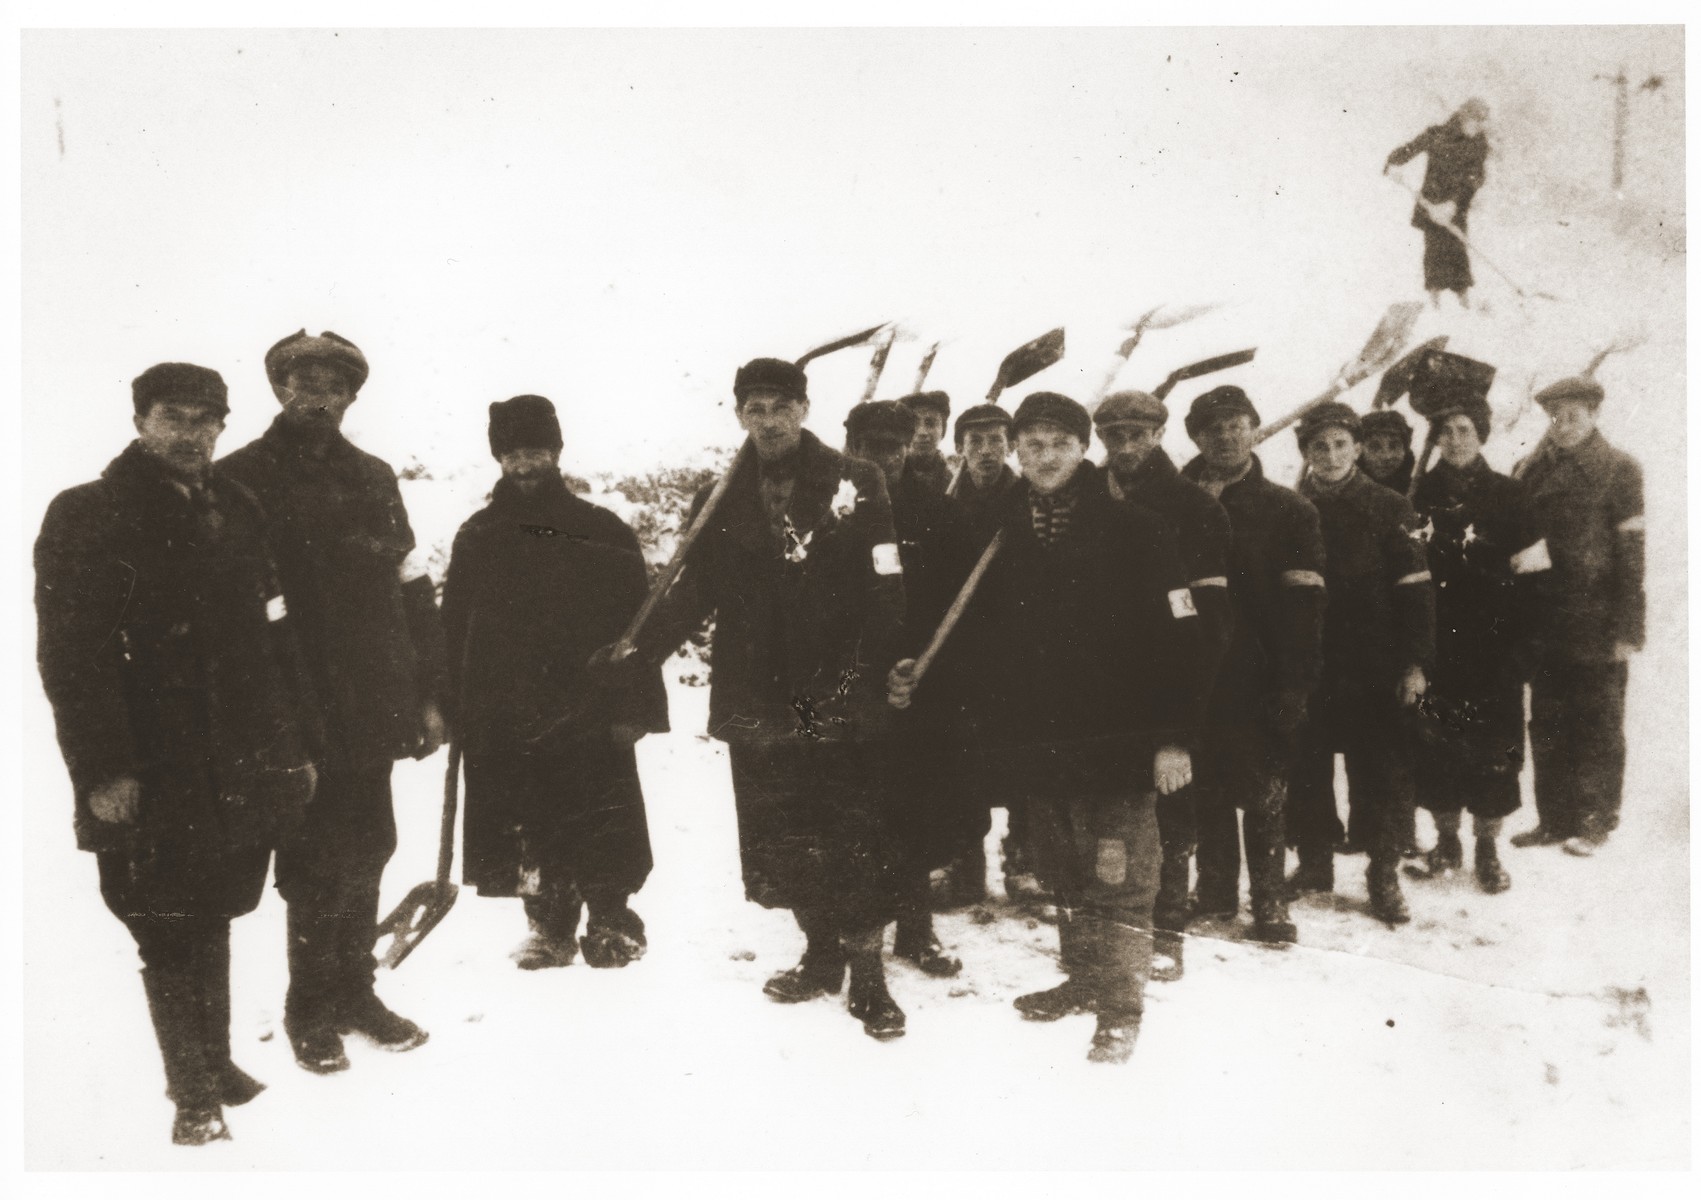 Jewish laborers wearing armbands are forced to shovel snow in Slawkow, Poland.

Chaim Szlojme Imerglik is on the far left. Also pictured is  Joseph Gleitman, the fourth person from the left.